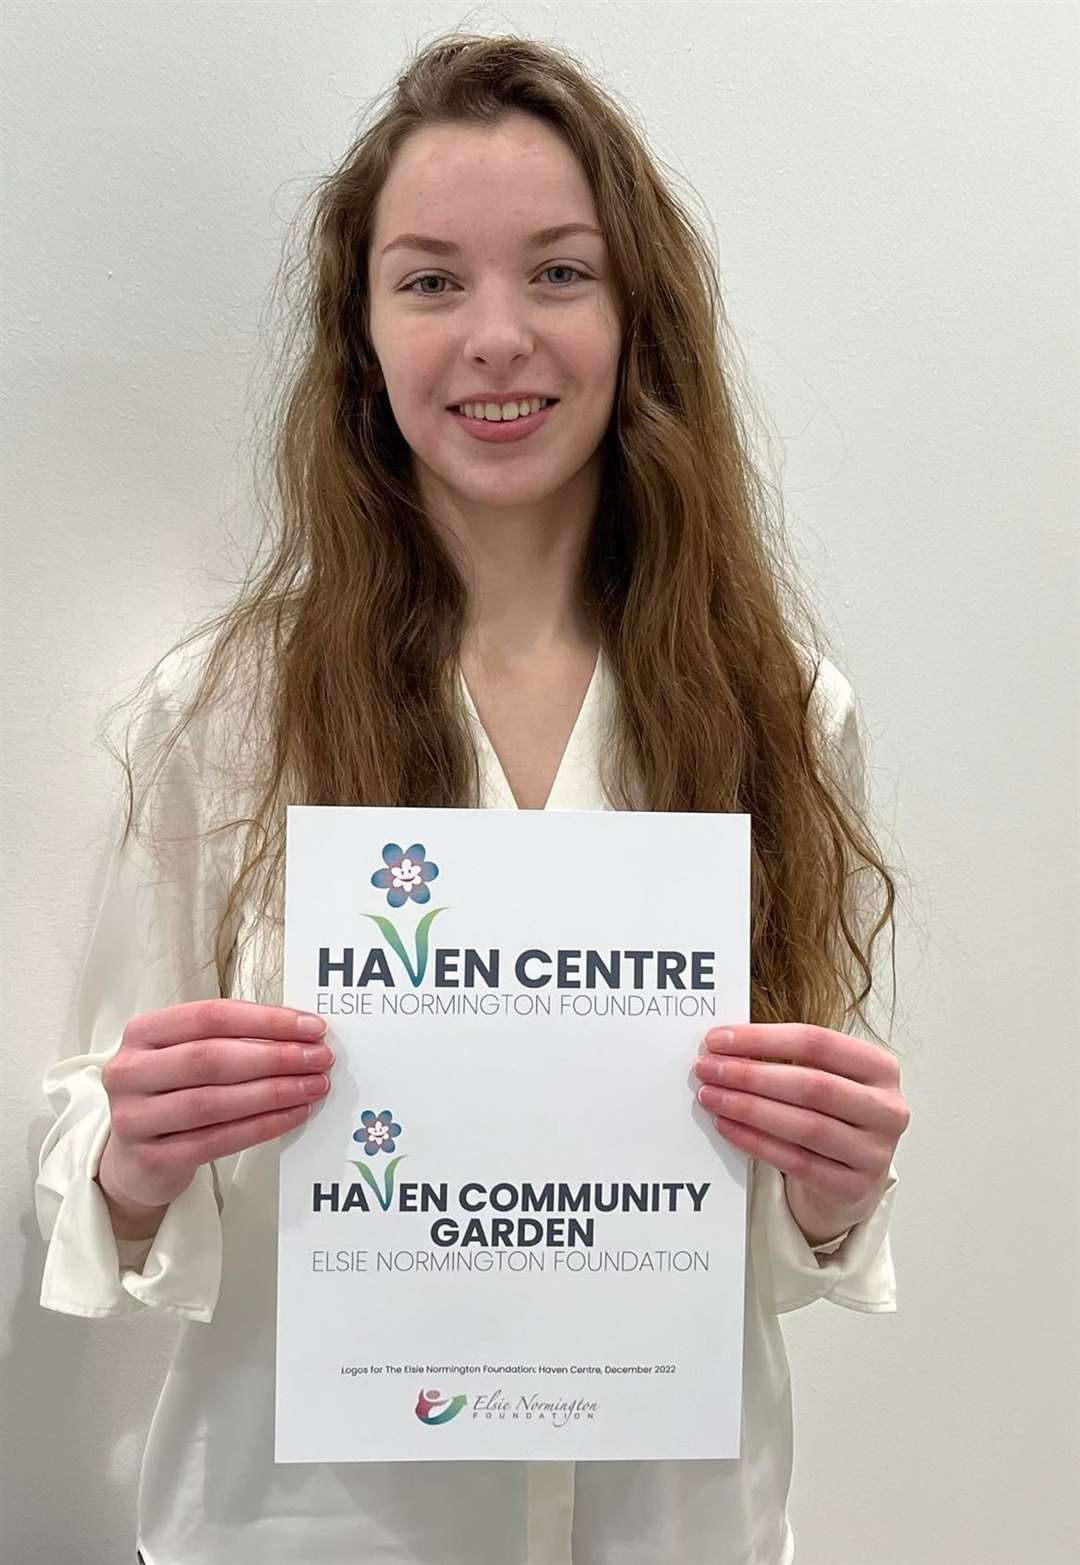 The logo designed by Robyn Paterson will be used for all the external and internal signage in the Haven Centre.